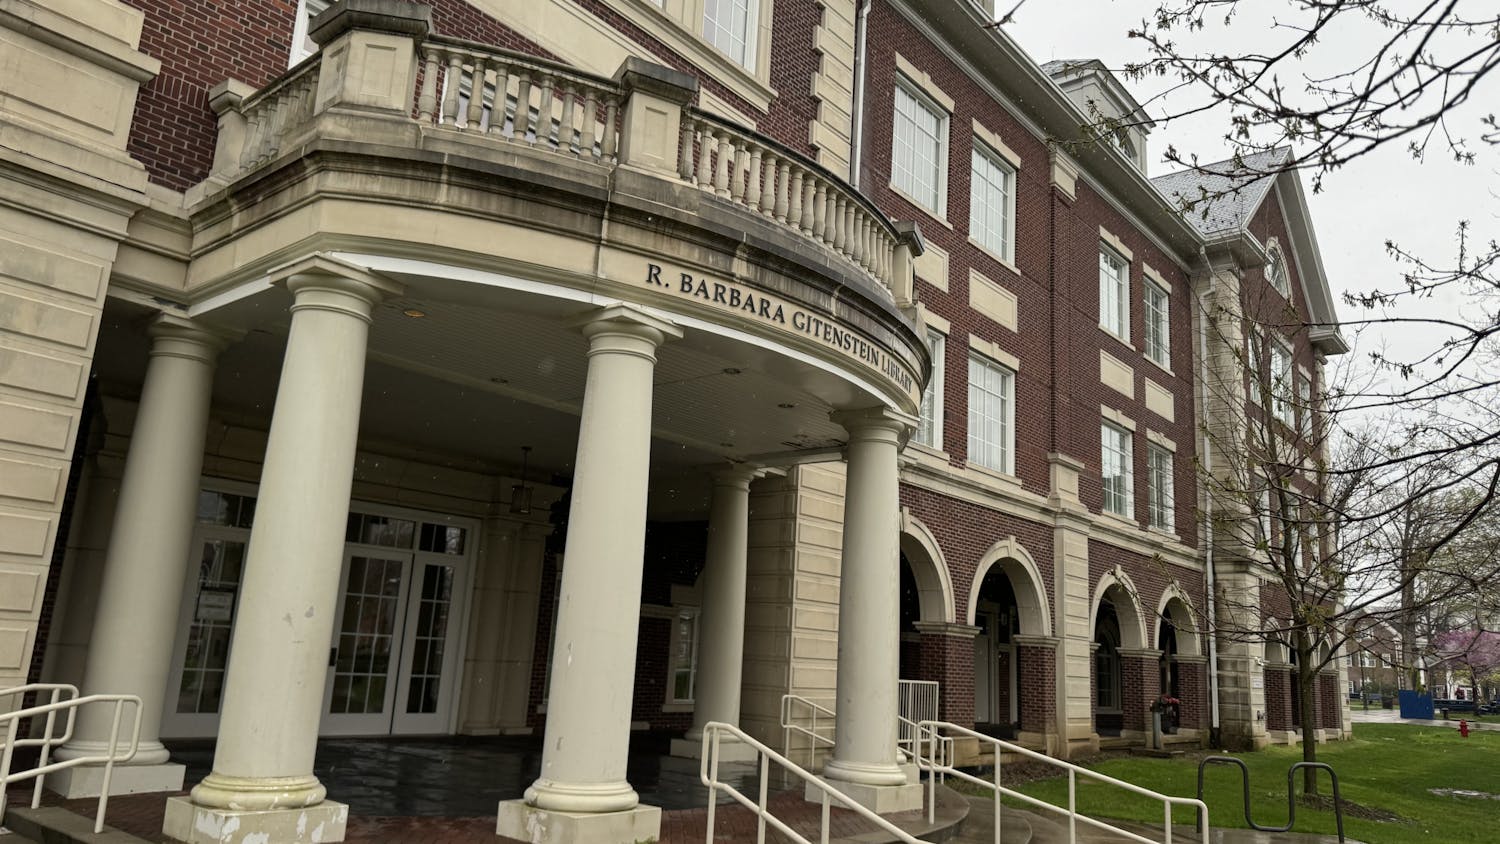 The suggestion that costs could be passed on to patrons came in an April 9 email that updated the College community on the progress of the LIONS Plan (Photo courtesy of Matthew Kaufman).